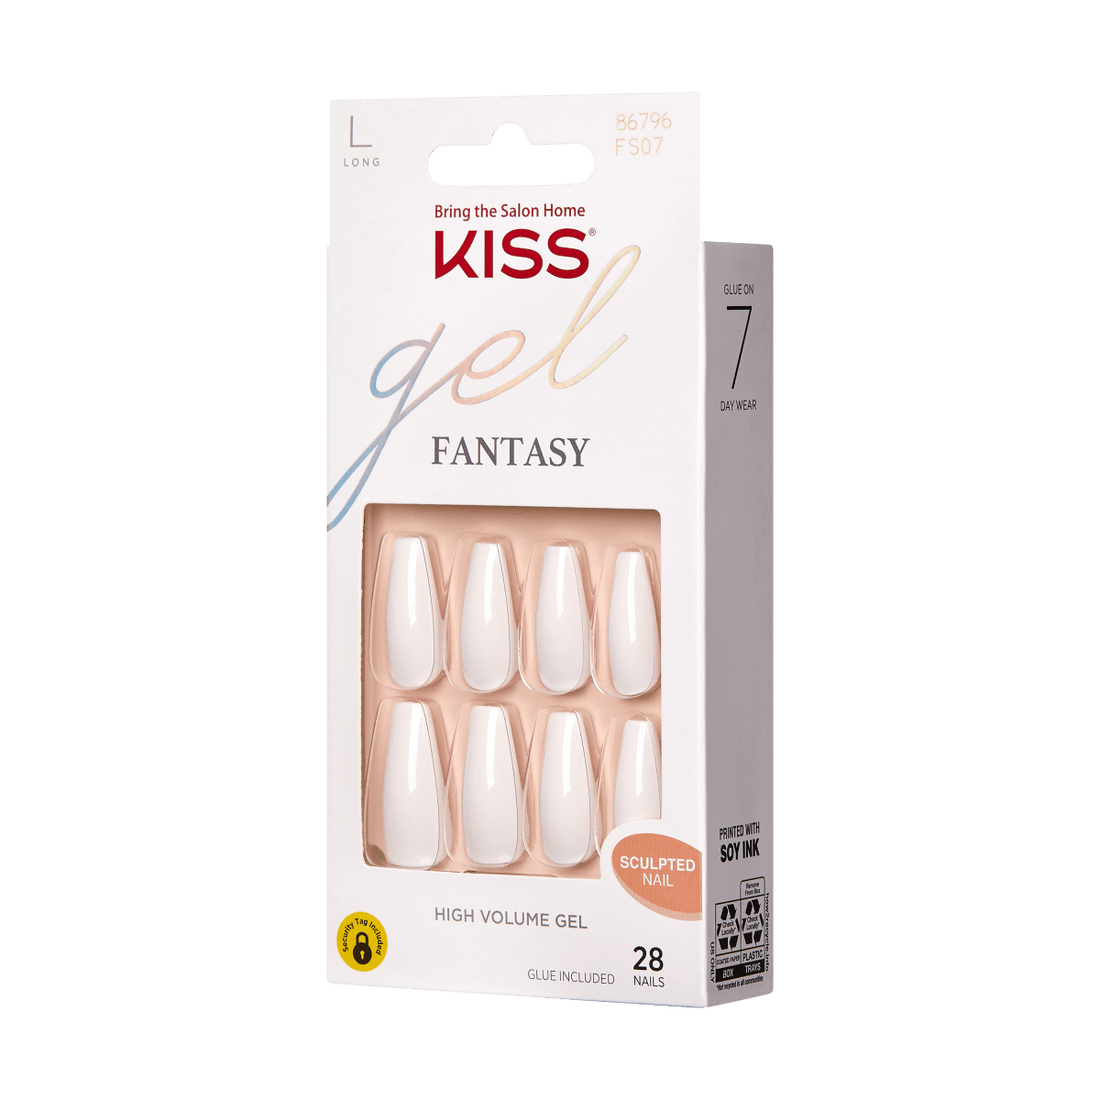 KISS Gel Fantasy, Press-On Nails, True Color, White, Long Coffin, 28ct